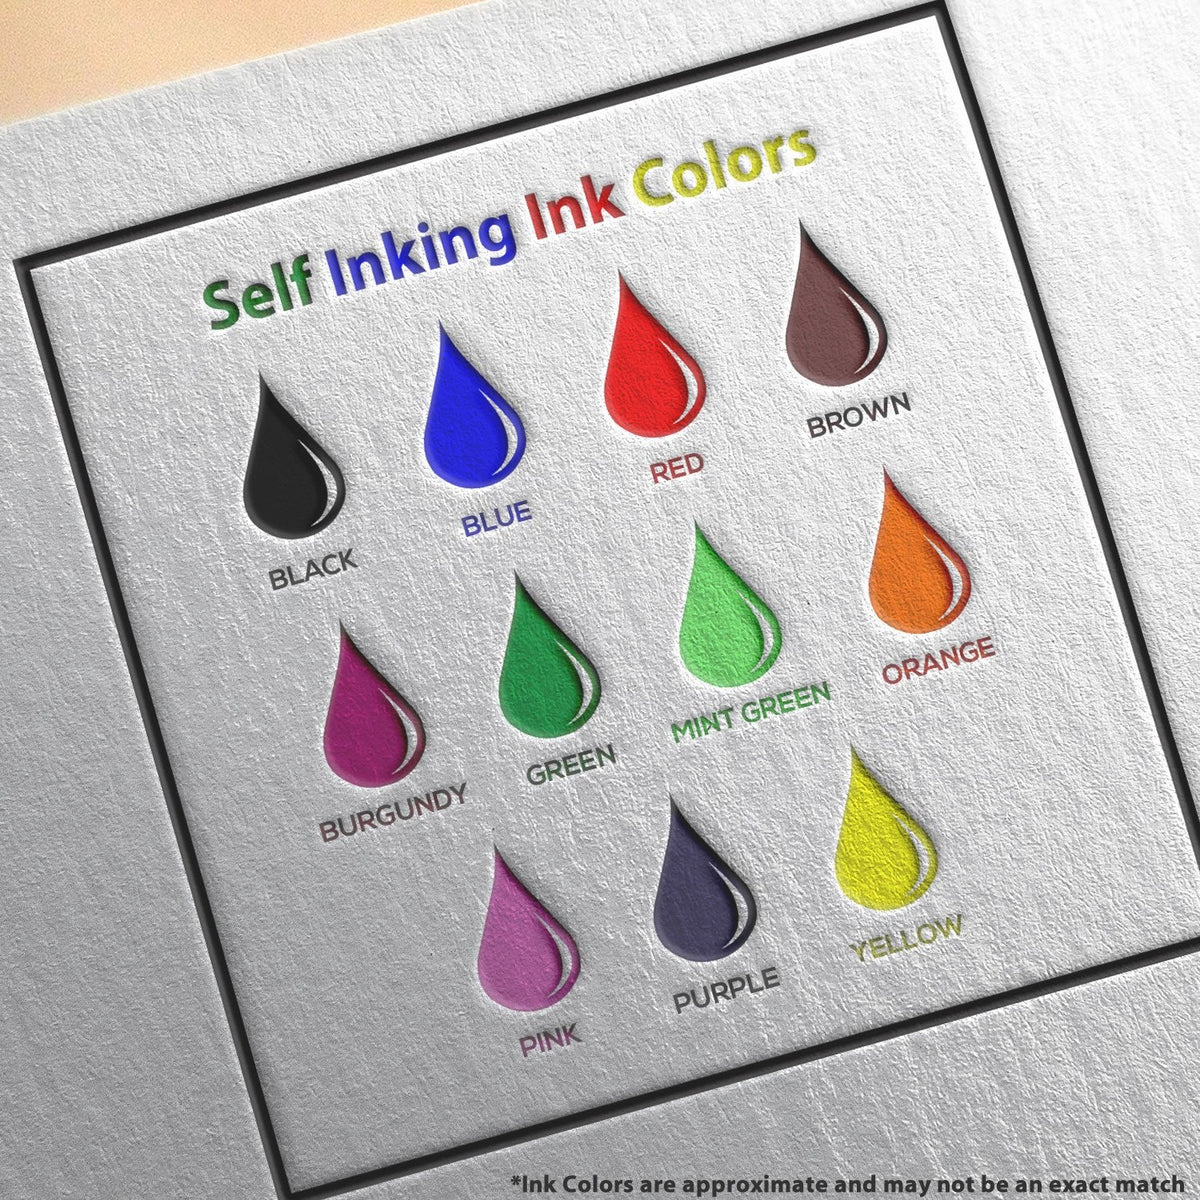 Self Inking Rewrite In Cursive Stamp Ink Color Options